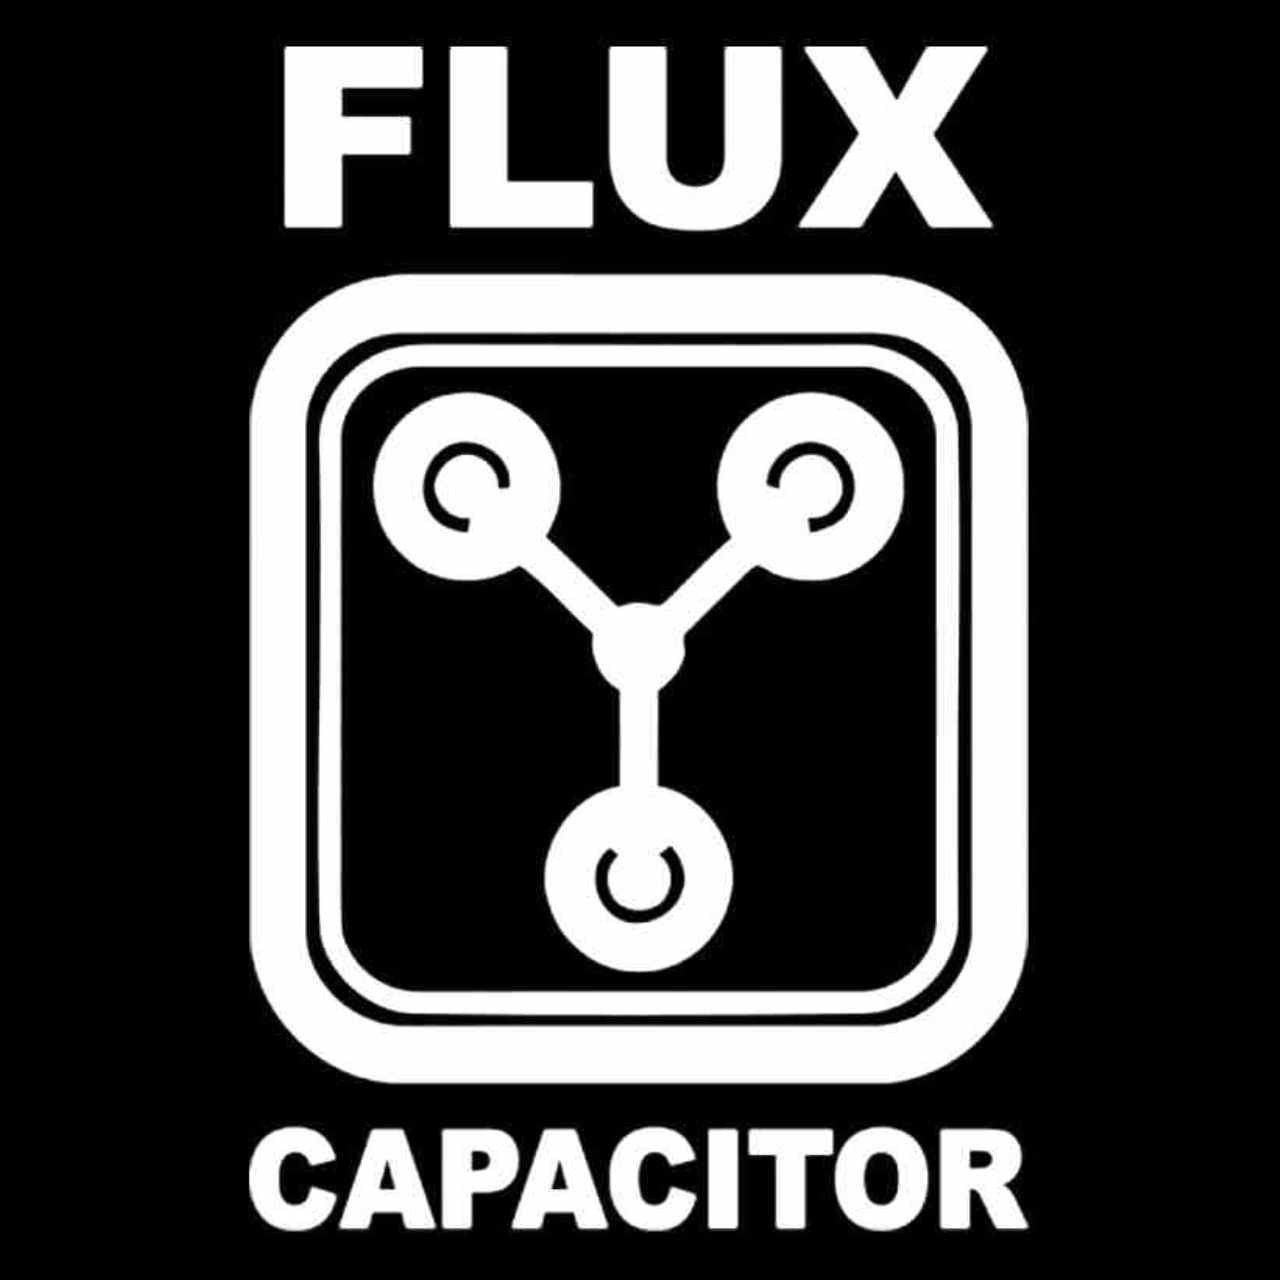 Flux Capacitor Back to the Future Vinyl Decal Sticker